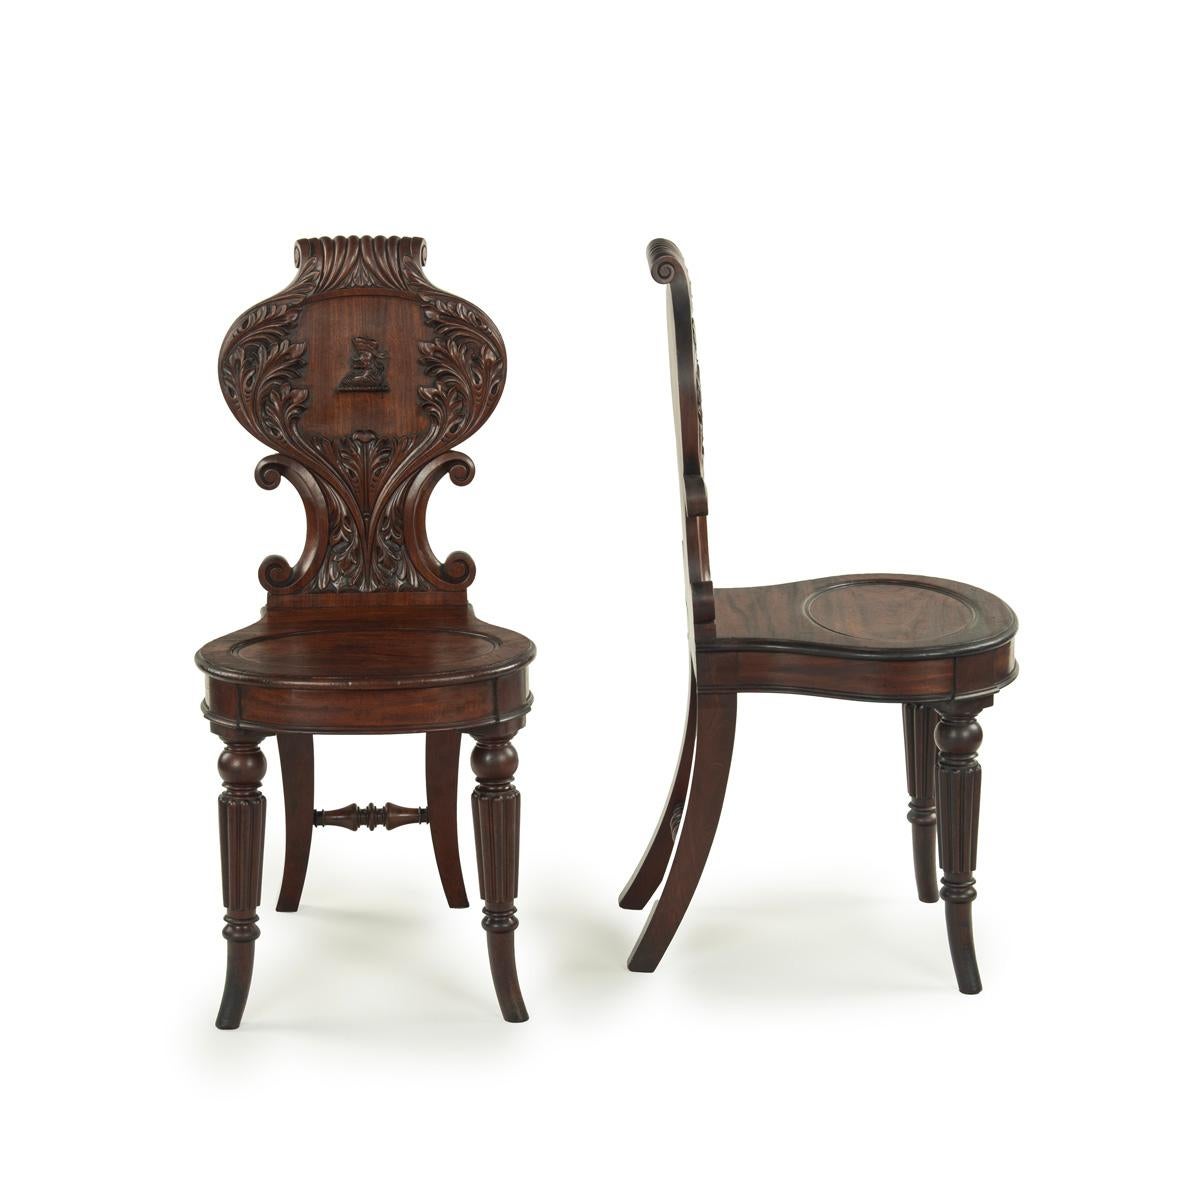 A fine pair of Regency mahogany armorial hall chairs attributed Gillows, each with an ogee back supported on C-scrolls and circular dished seat raised on turned and reeded outswept front legs, the rectangular section back legs joined by a shaped